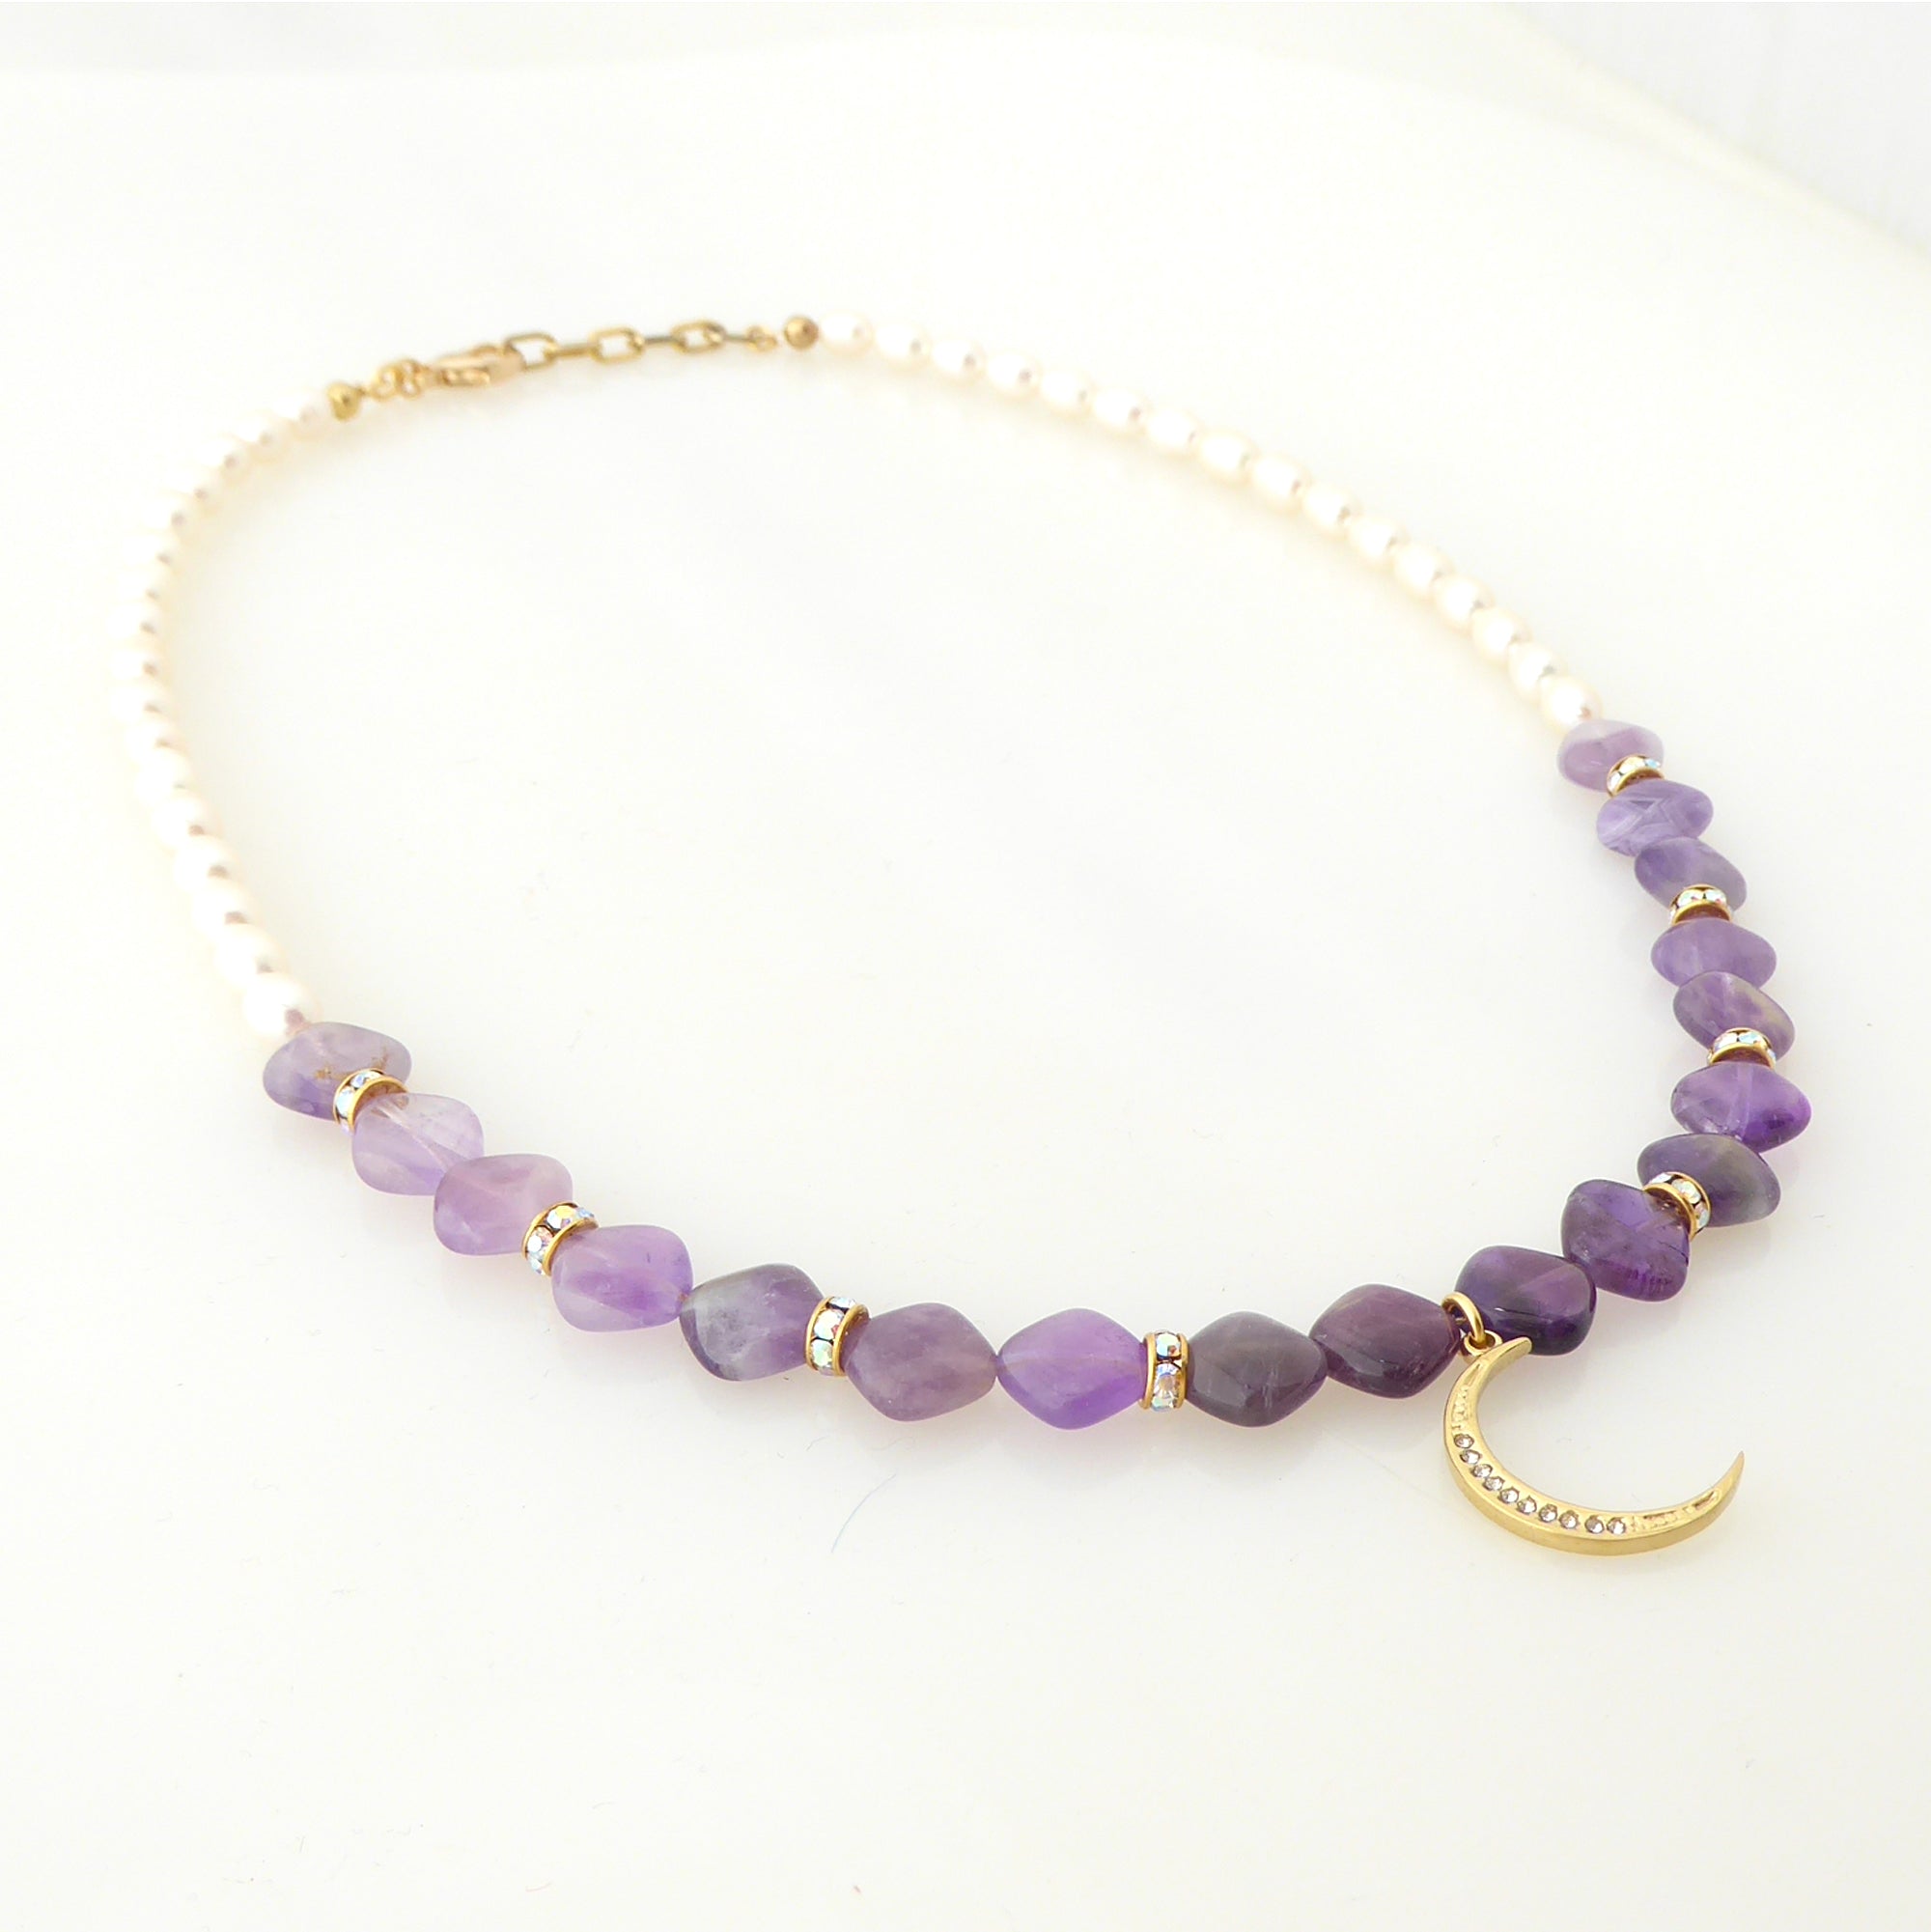 Amethyst and gold crescent moon necklace by Jenny Dayco 2